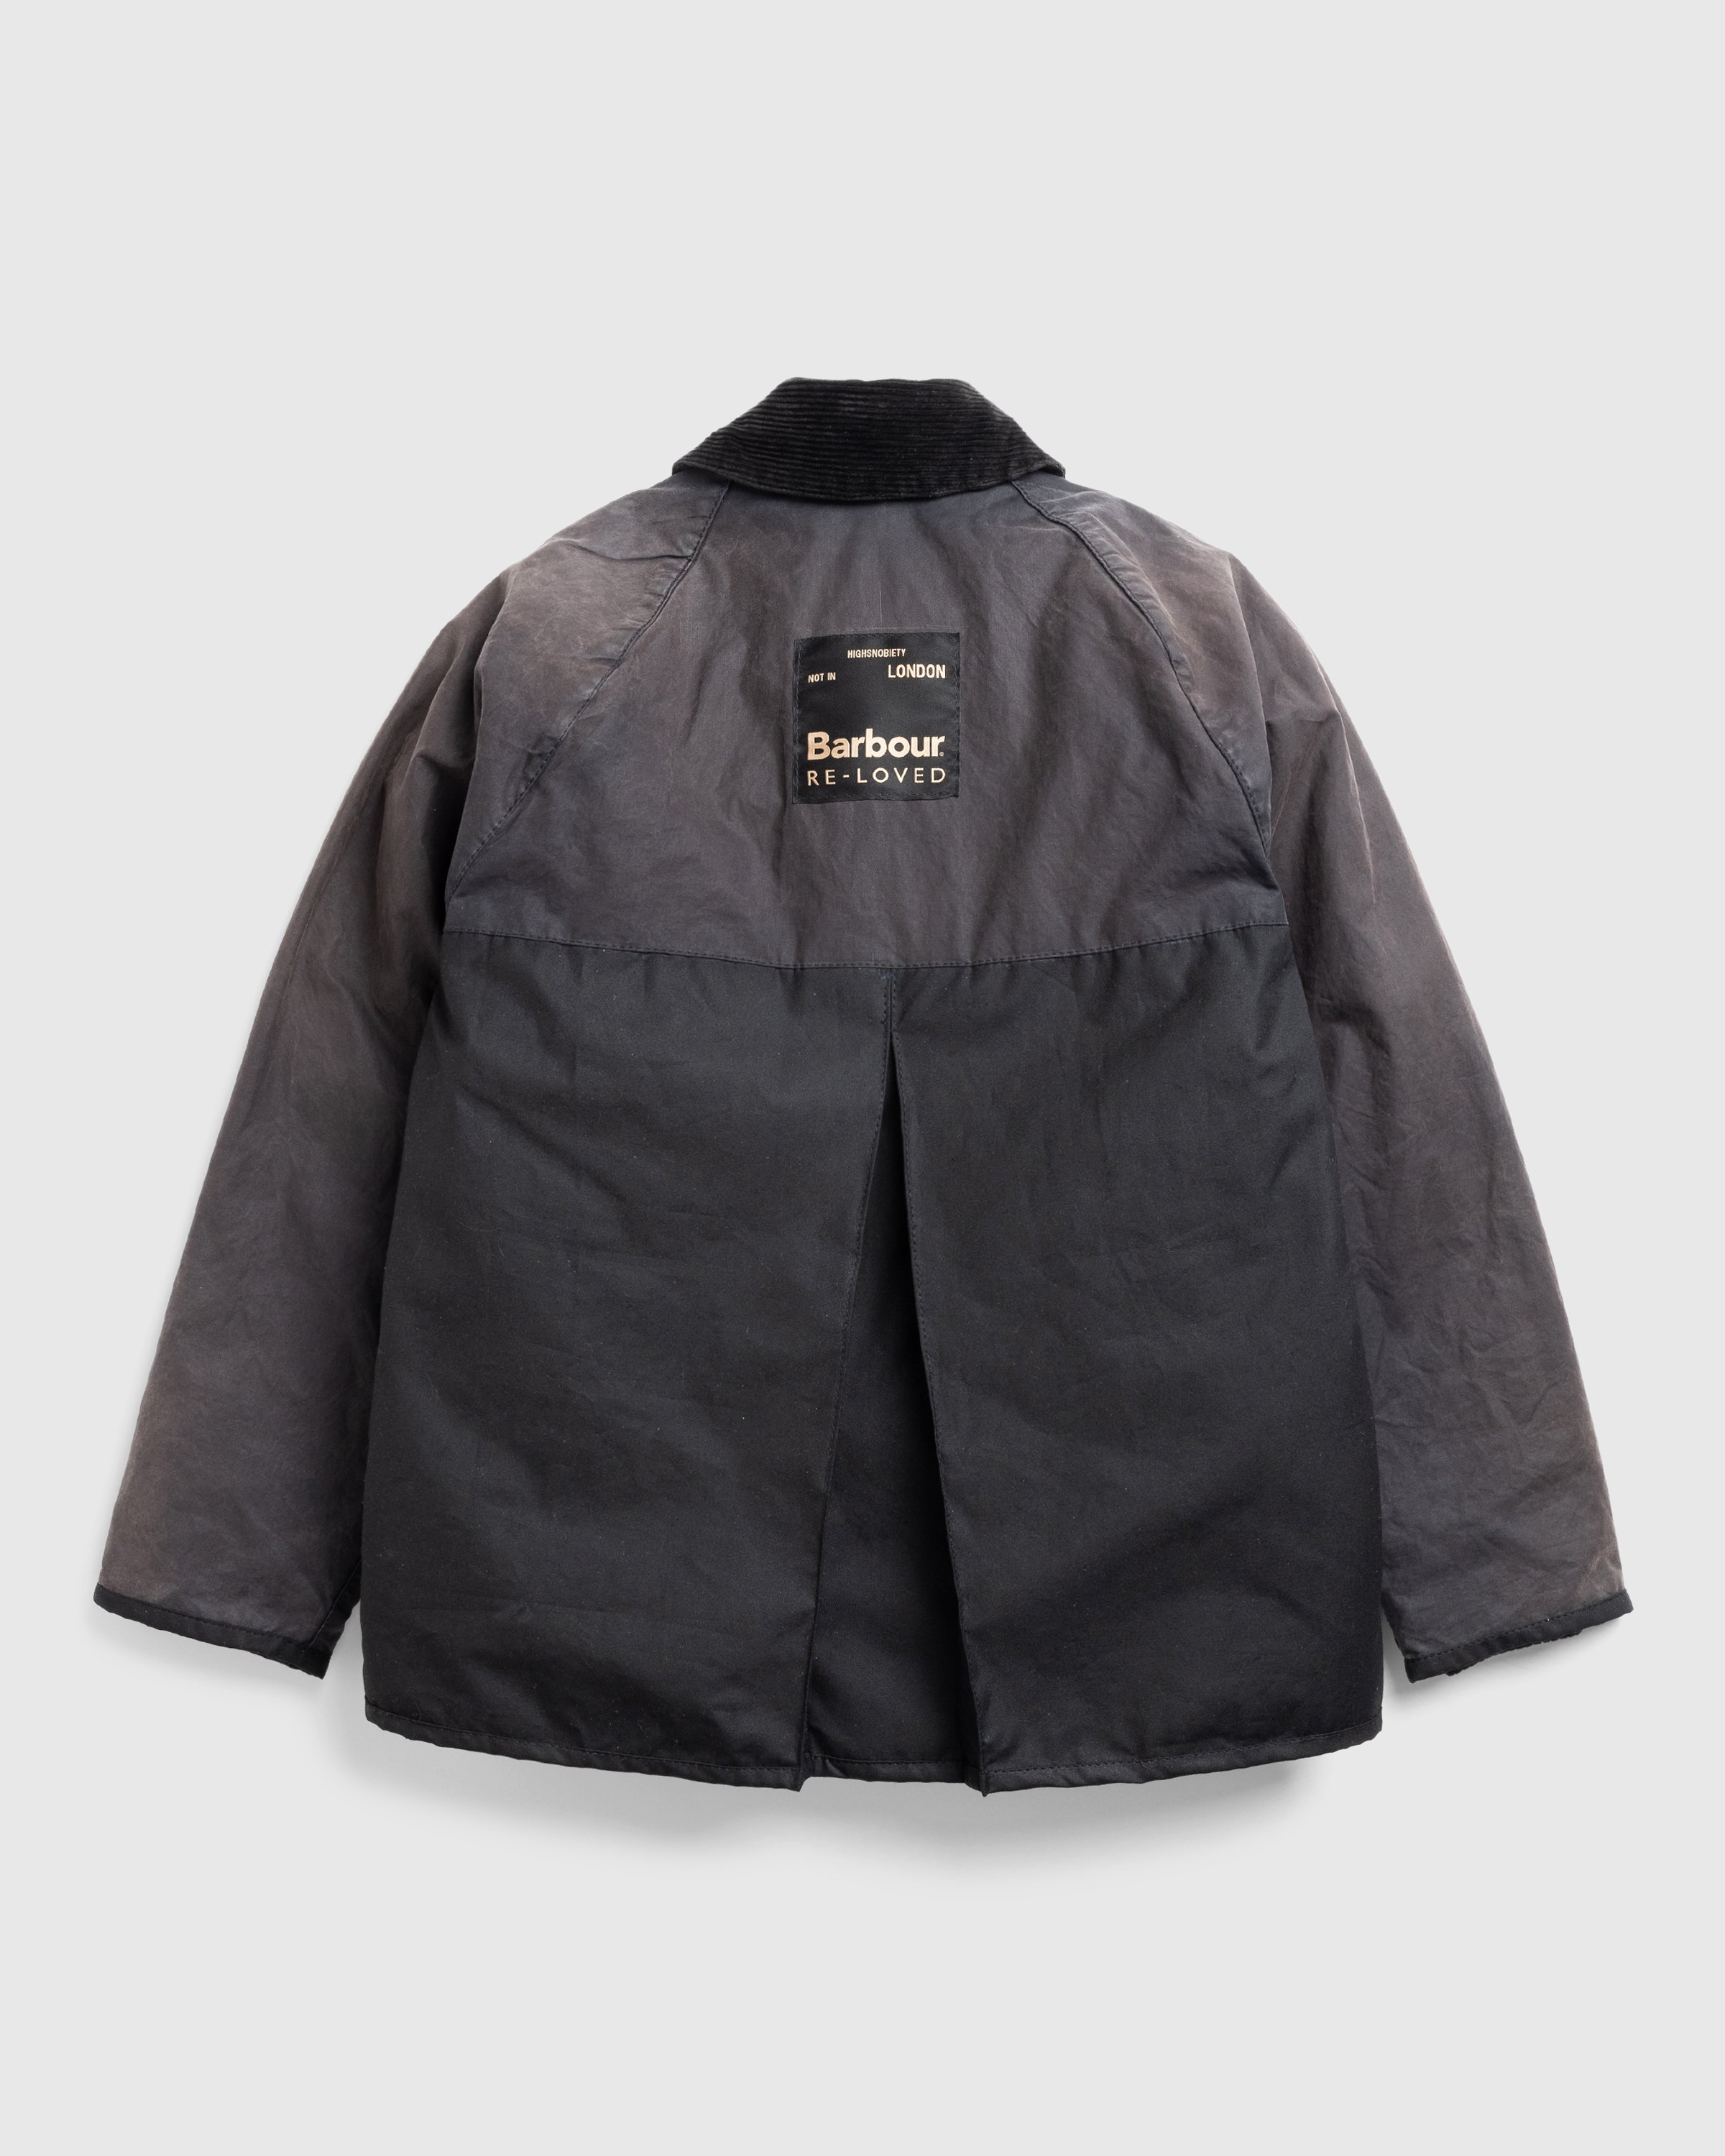 Barbour x Highsnobiety - Re-Loved Cropped Bedale Jacket 1 - 32 - Grey-Black - Clothing - Grey - Image 2